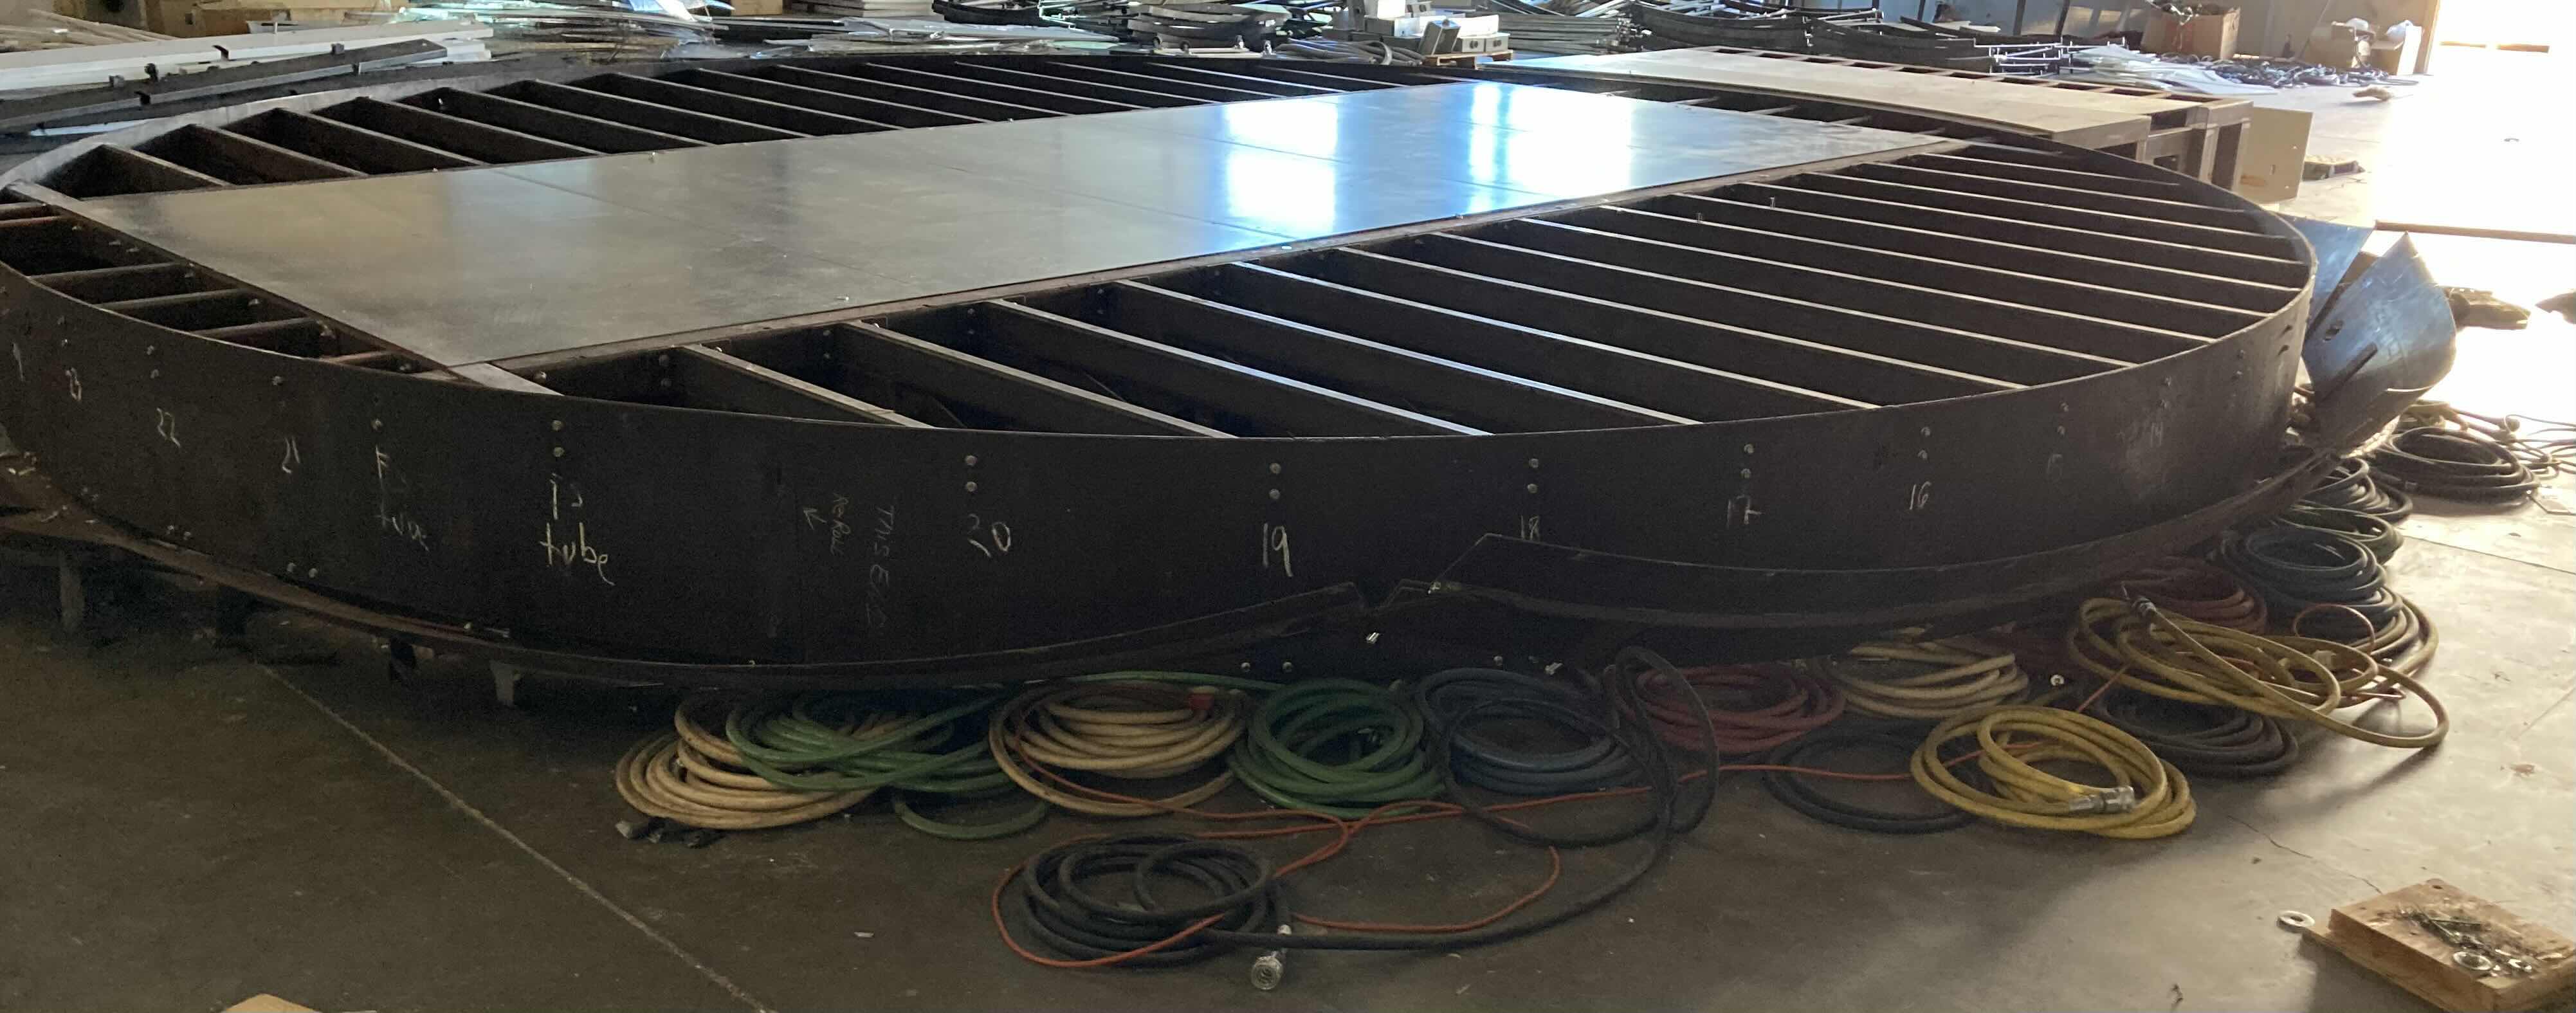 Photo 5 of CUSTOM FABRICATED HEAVY-DUTY STEEL AIR HOSE OPERATED VEHICLE PLATFORM W 19 AIR HOSES FOR BAG LIFT- VARIOUS LENGTHS & PSI CAPACITY 353” X 282” H23” (APPOX 2-3TONS)